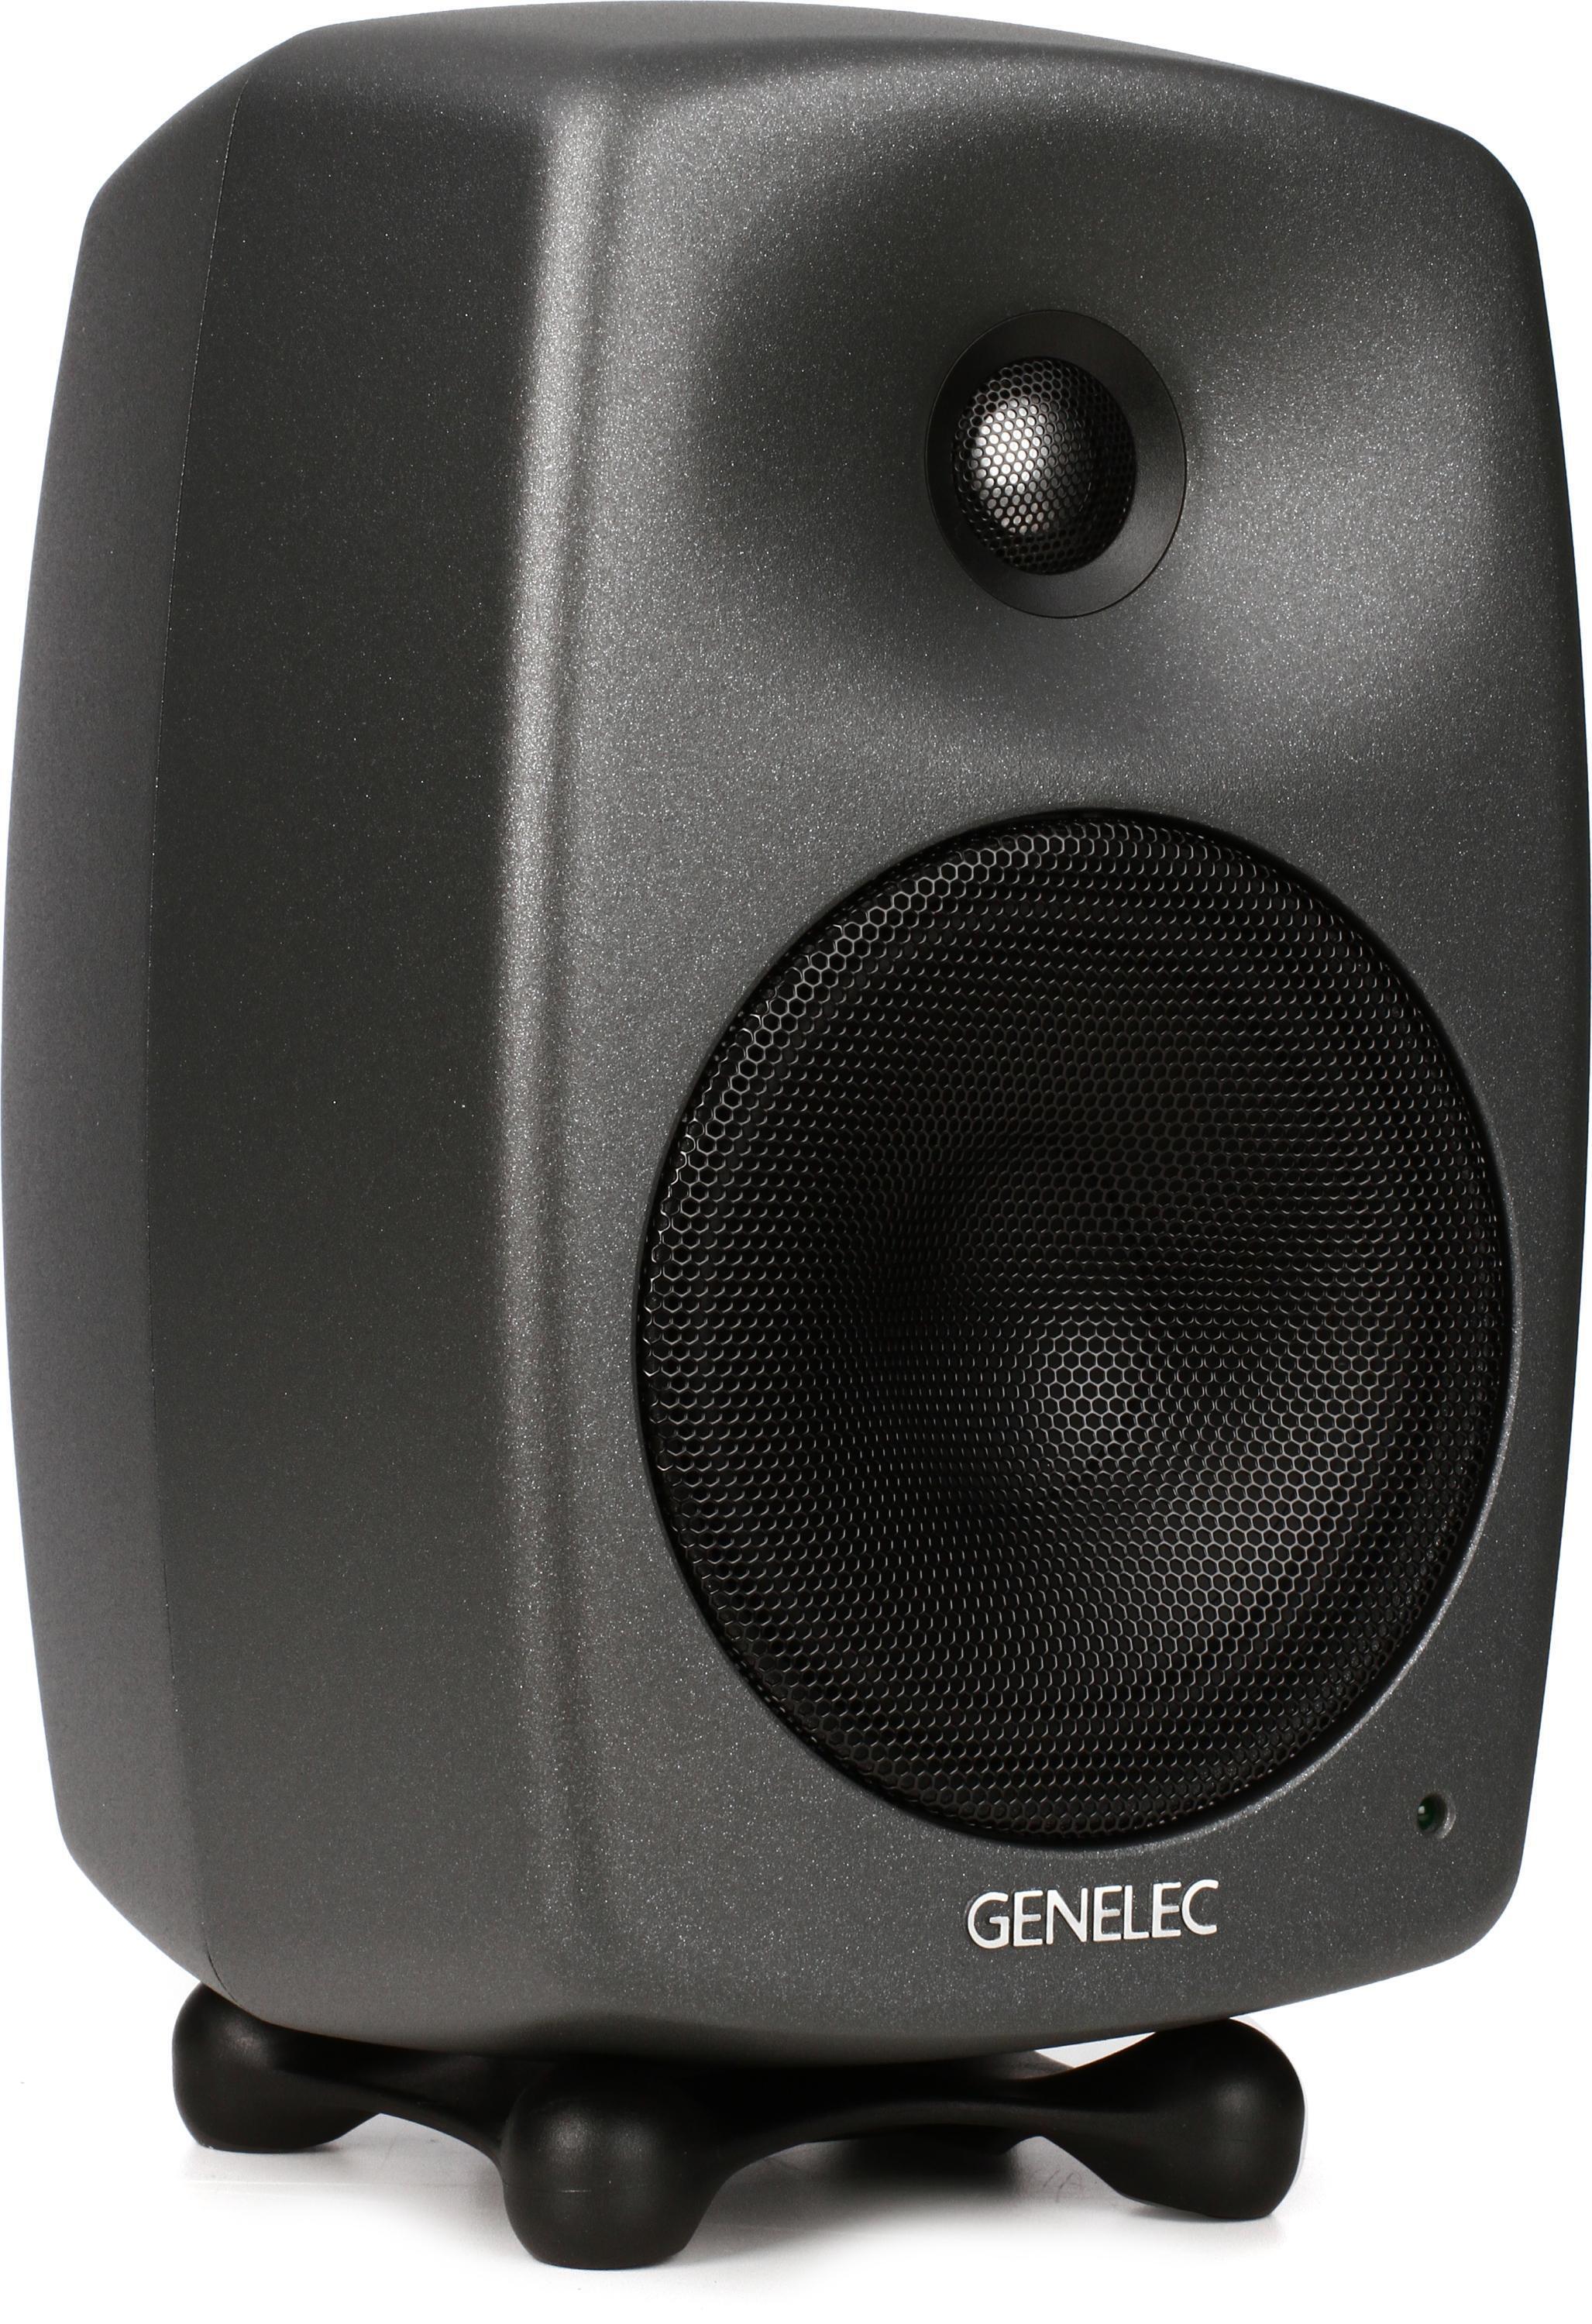 Genelec 8030.LSE Triple Play 5 inch Powered 2.1 Monitor System 